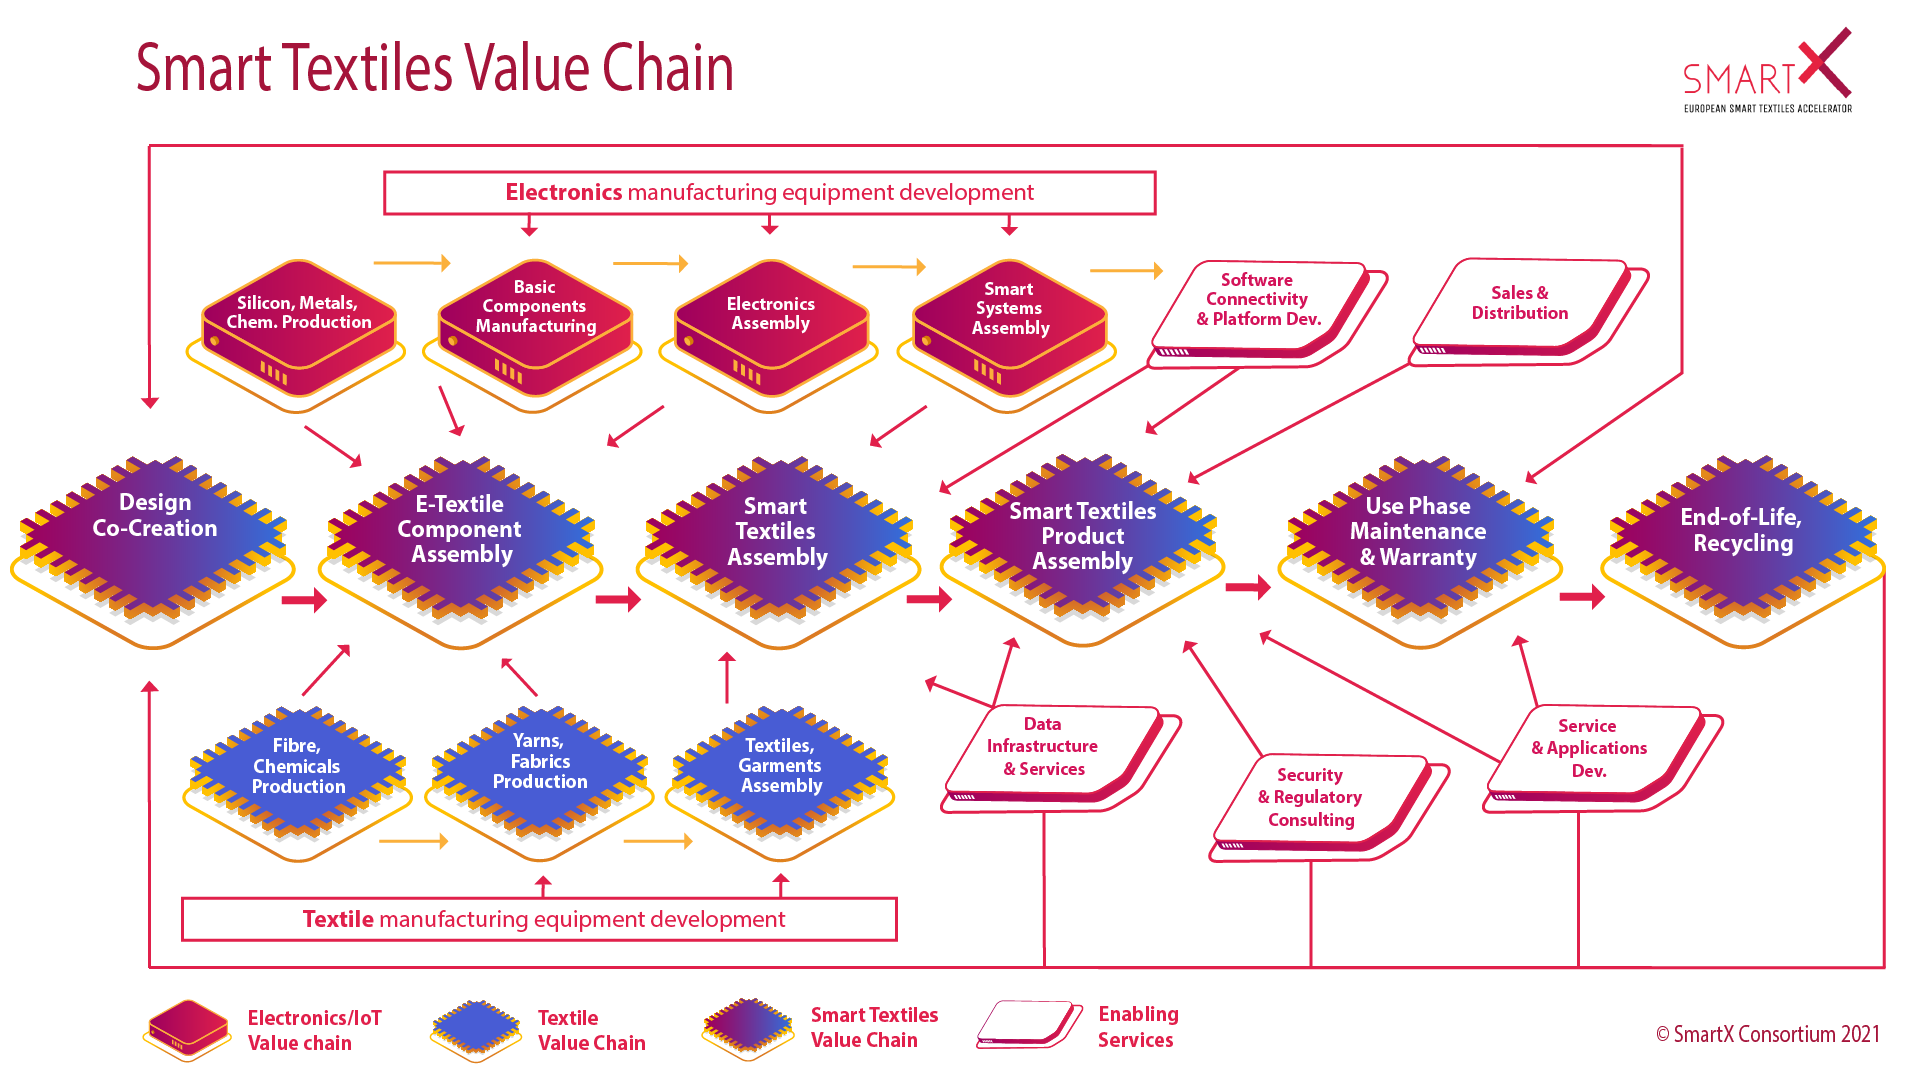 Introducing the full Smart Textiles Value Chain Map